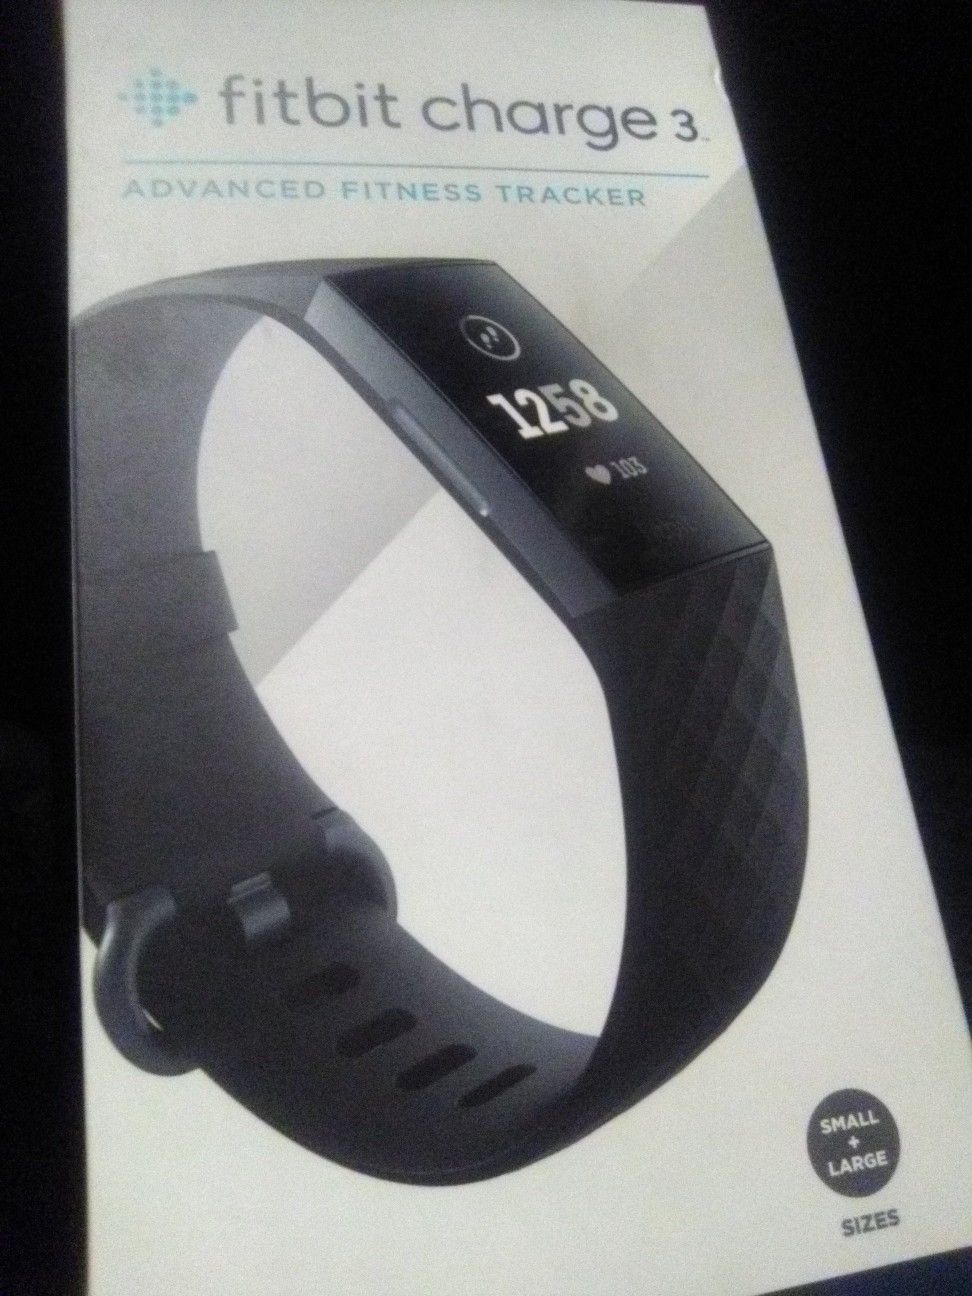 **NEW** FITBIT CHARGE 3 ADVANCED FITNESS TRACKER